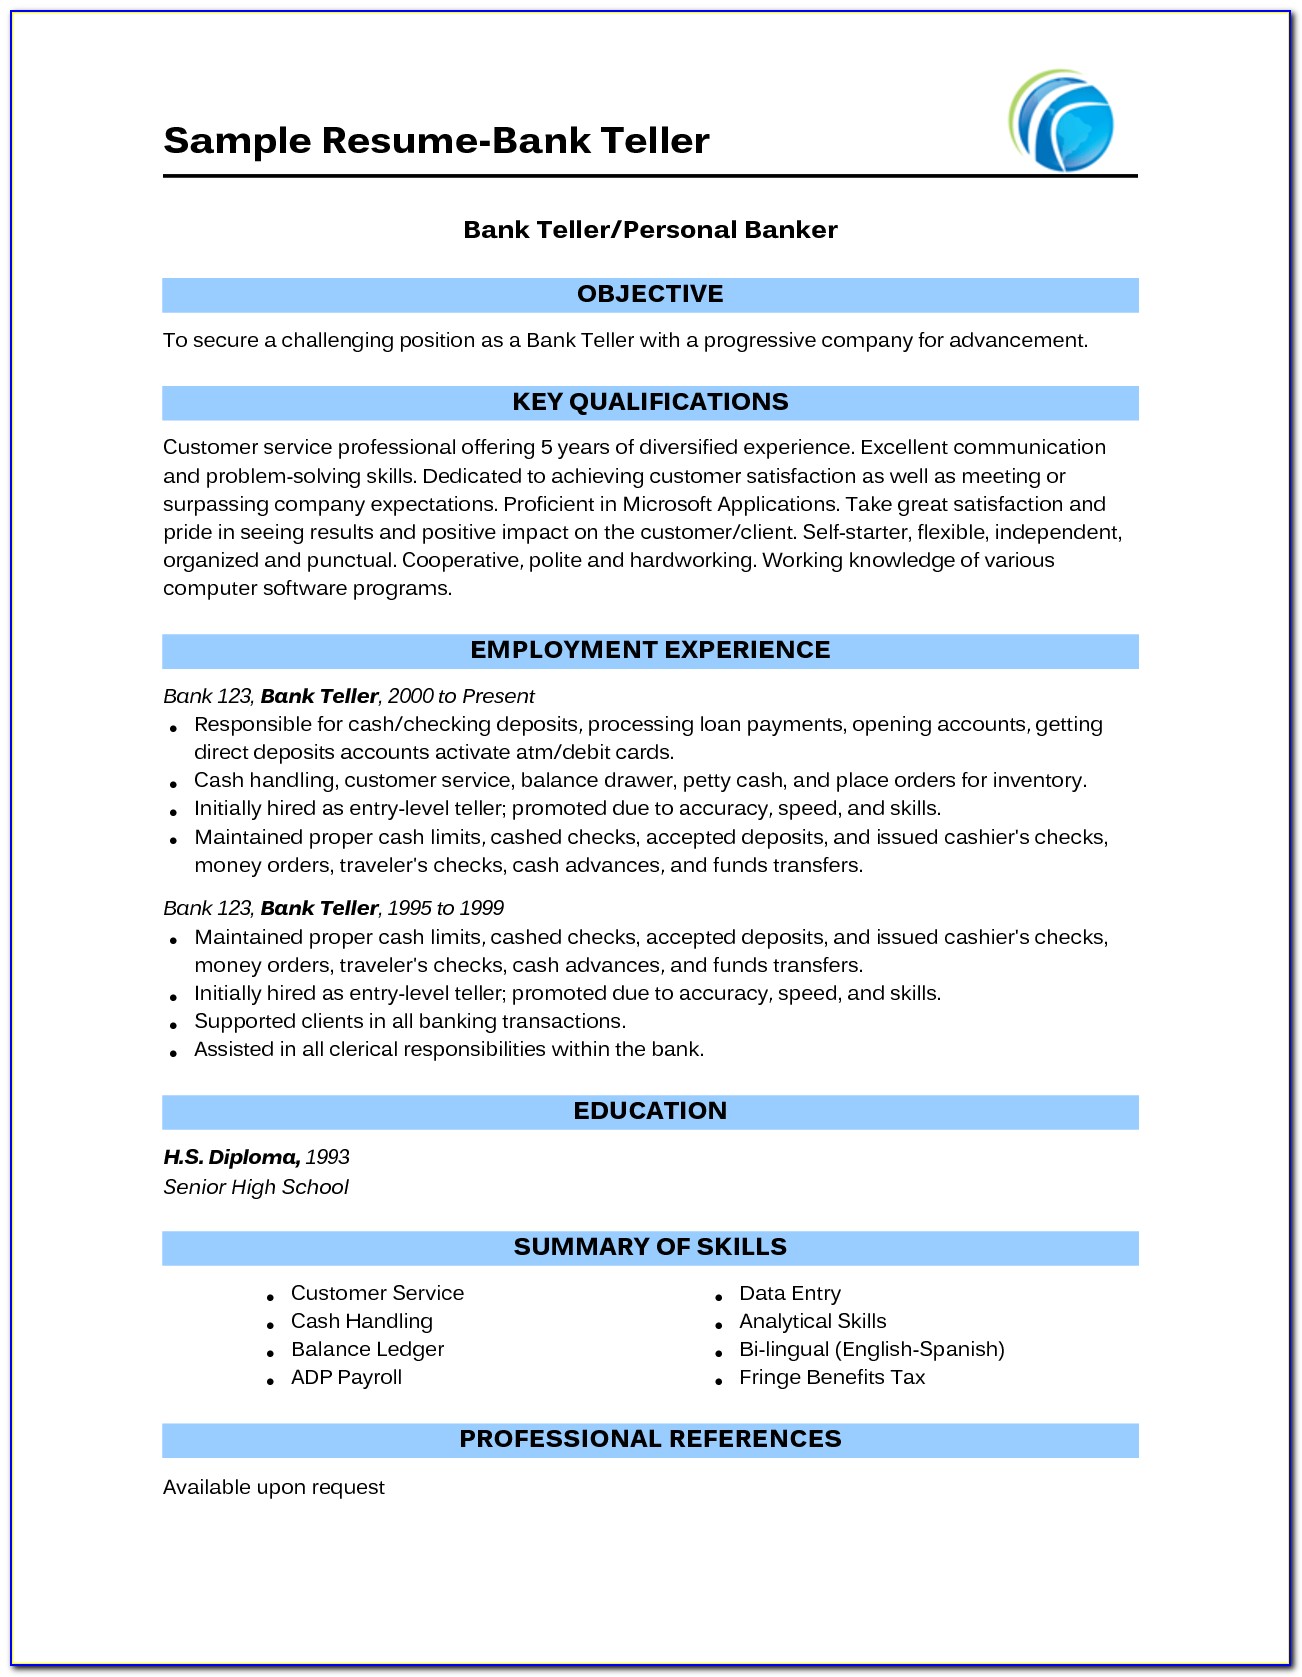 Bank Teller Cover Letter With Customer Service Experience